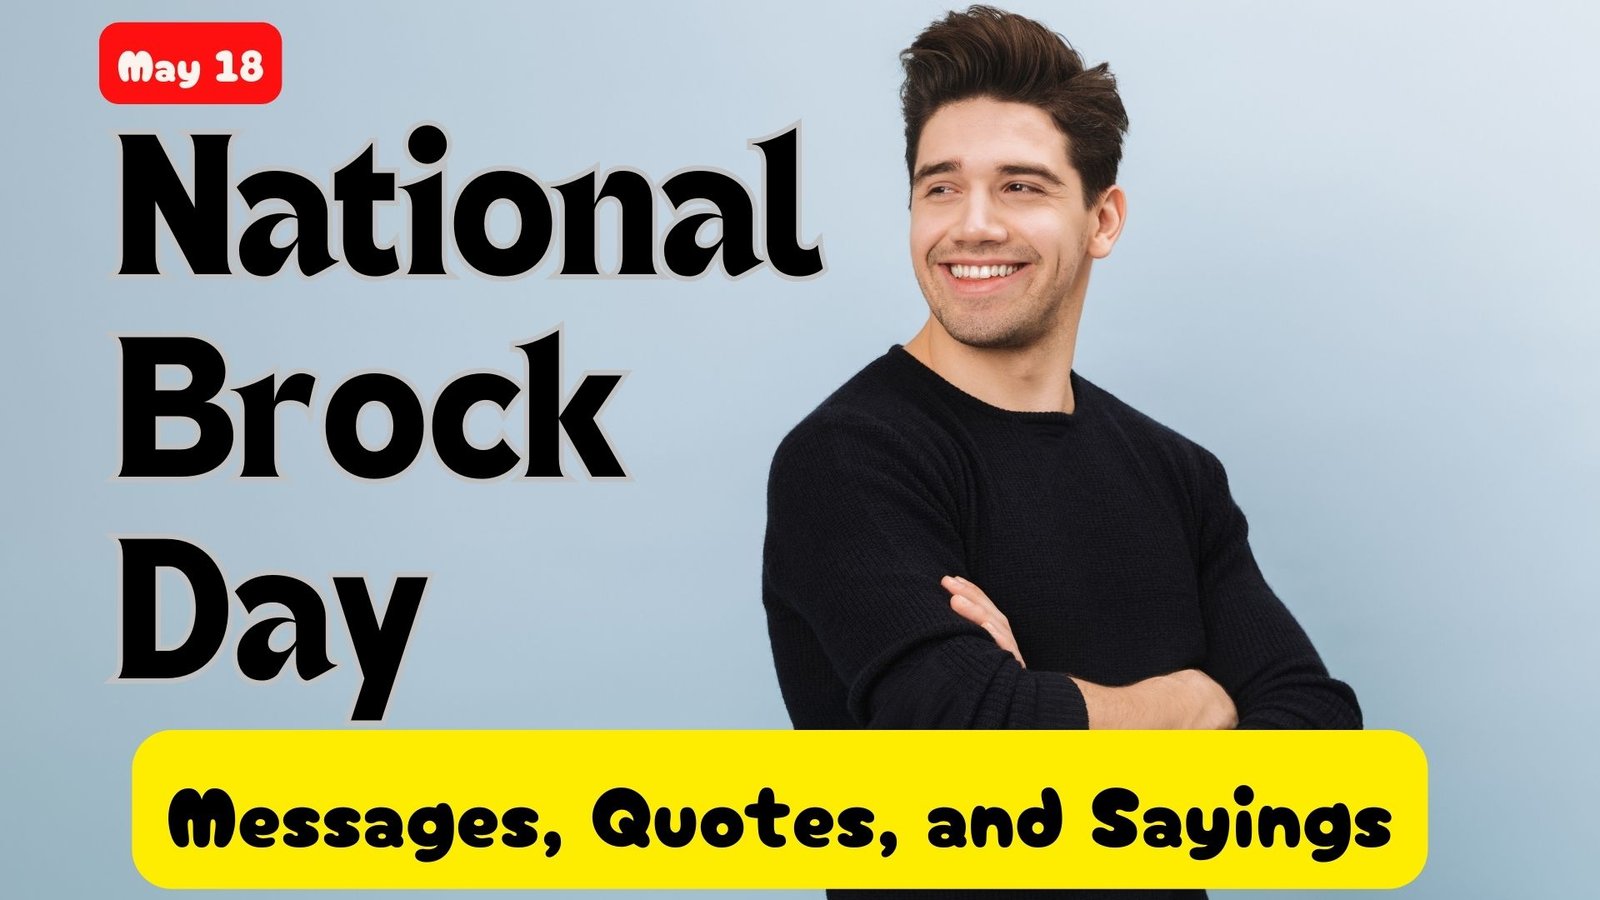 National Brock Day – May 18: Messages, Quotes & Greetings